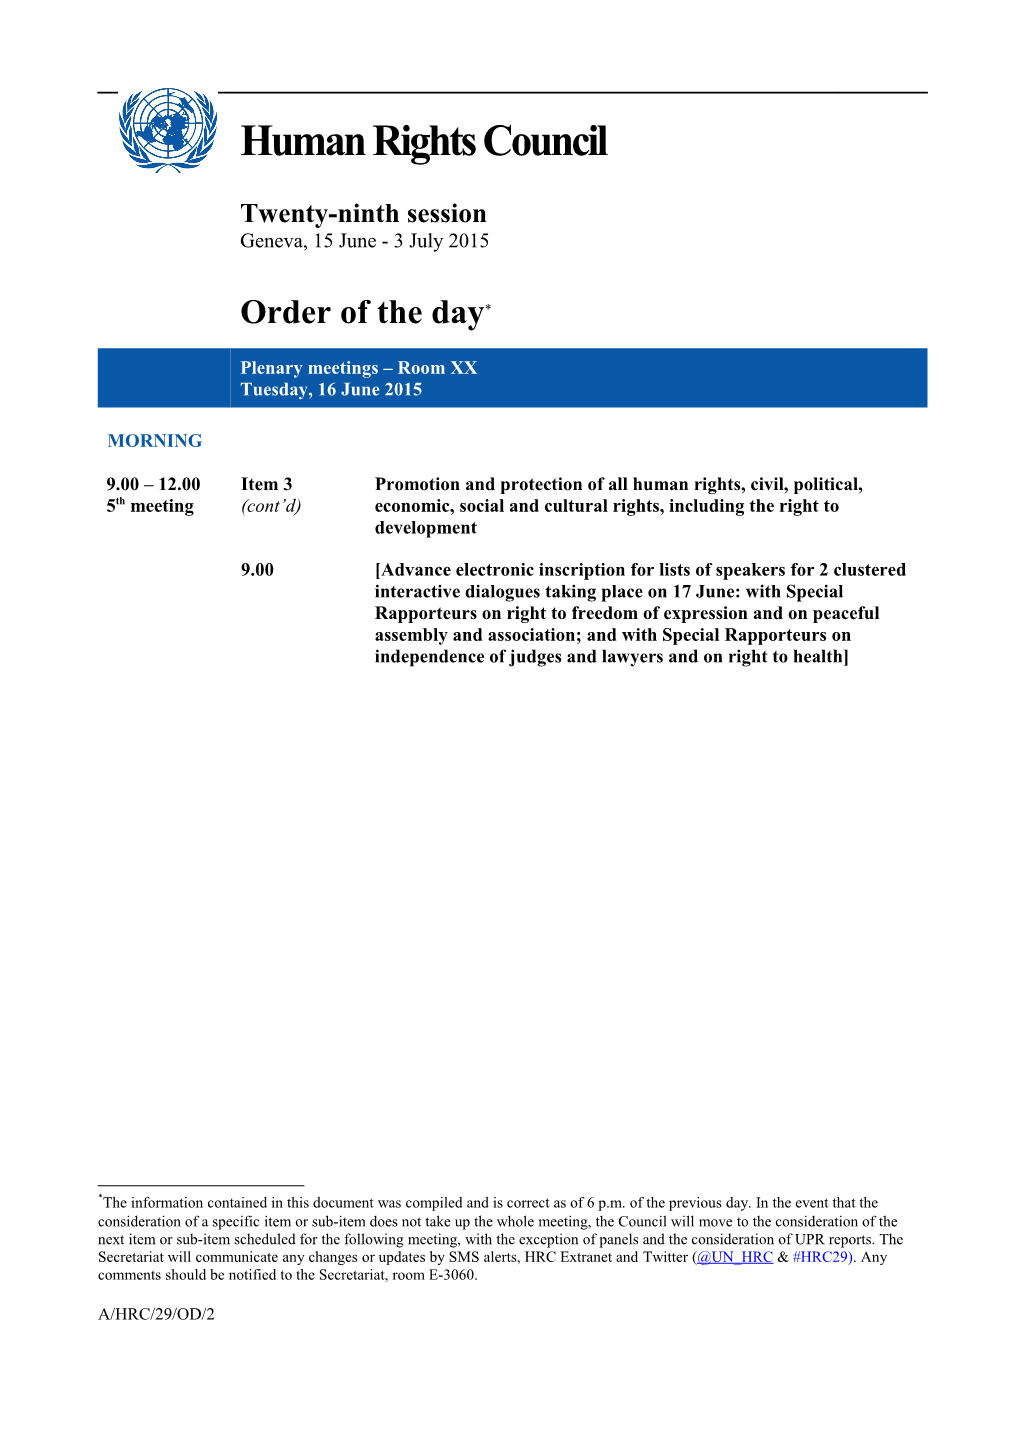 Order of the Day, Tuesday 16 June 2015 in English (Word)